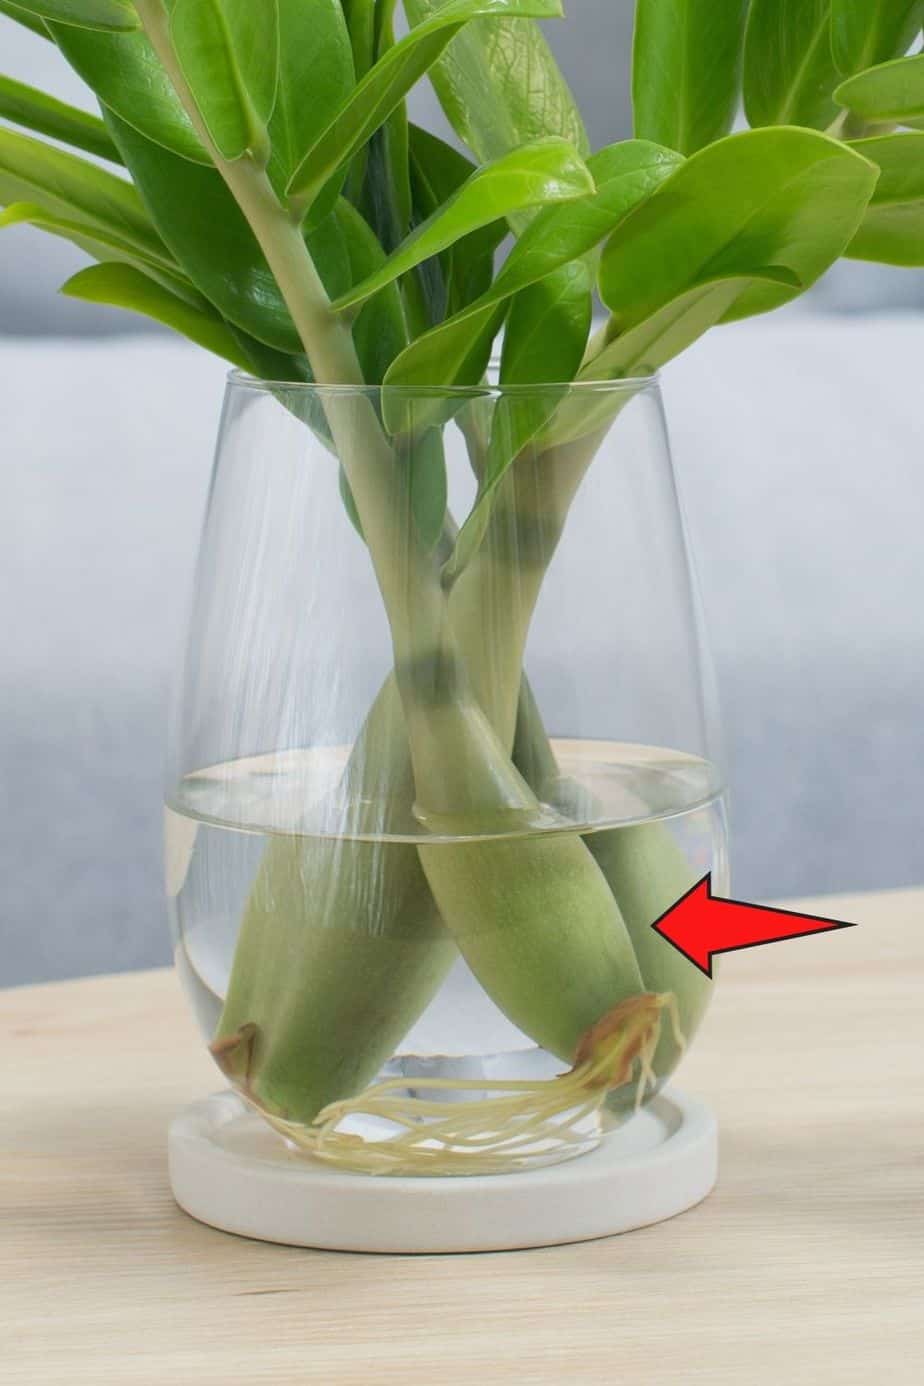 Sometimes, you can see a rhizome growing out of the ZZ plant leaf cutting you placed in the water